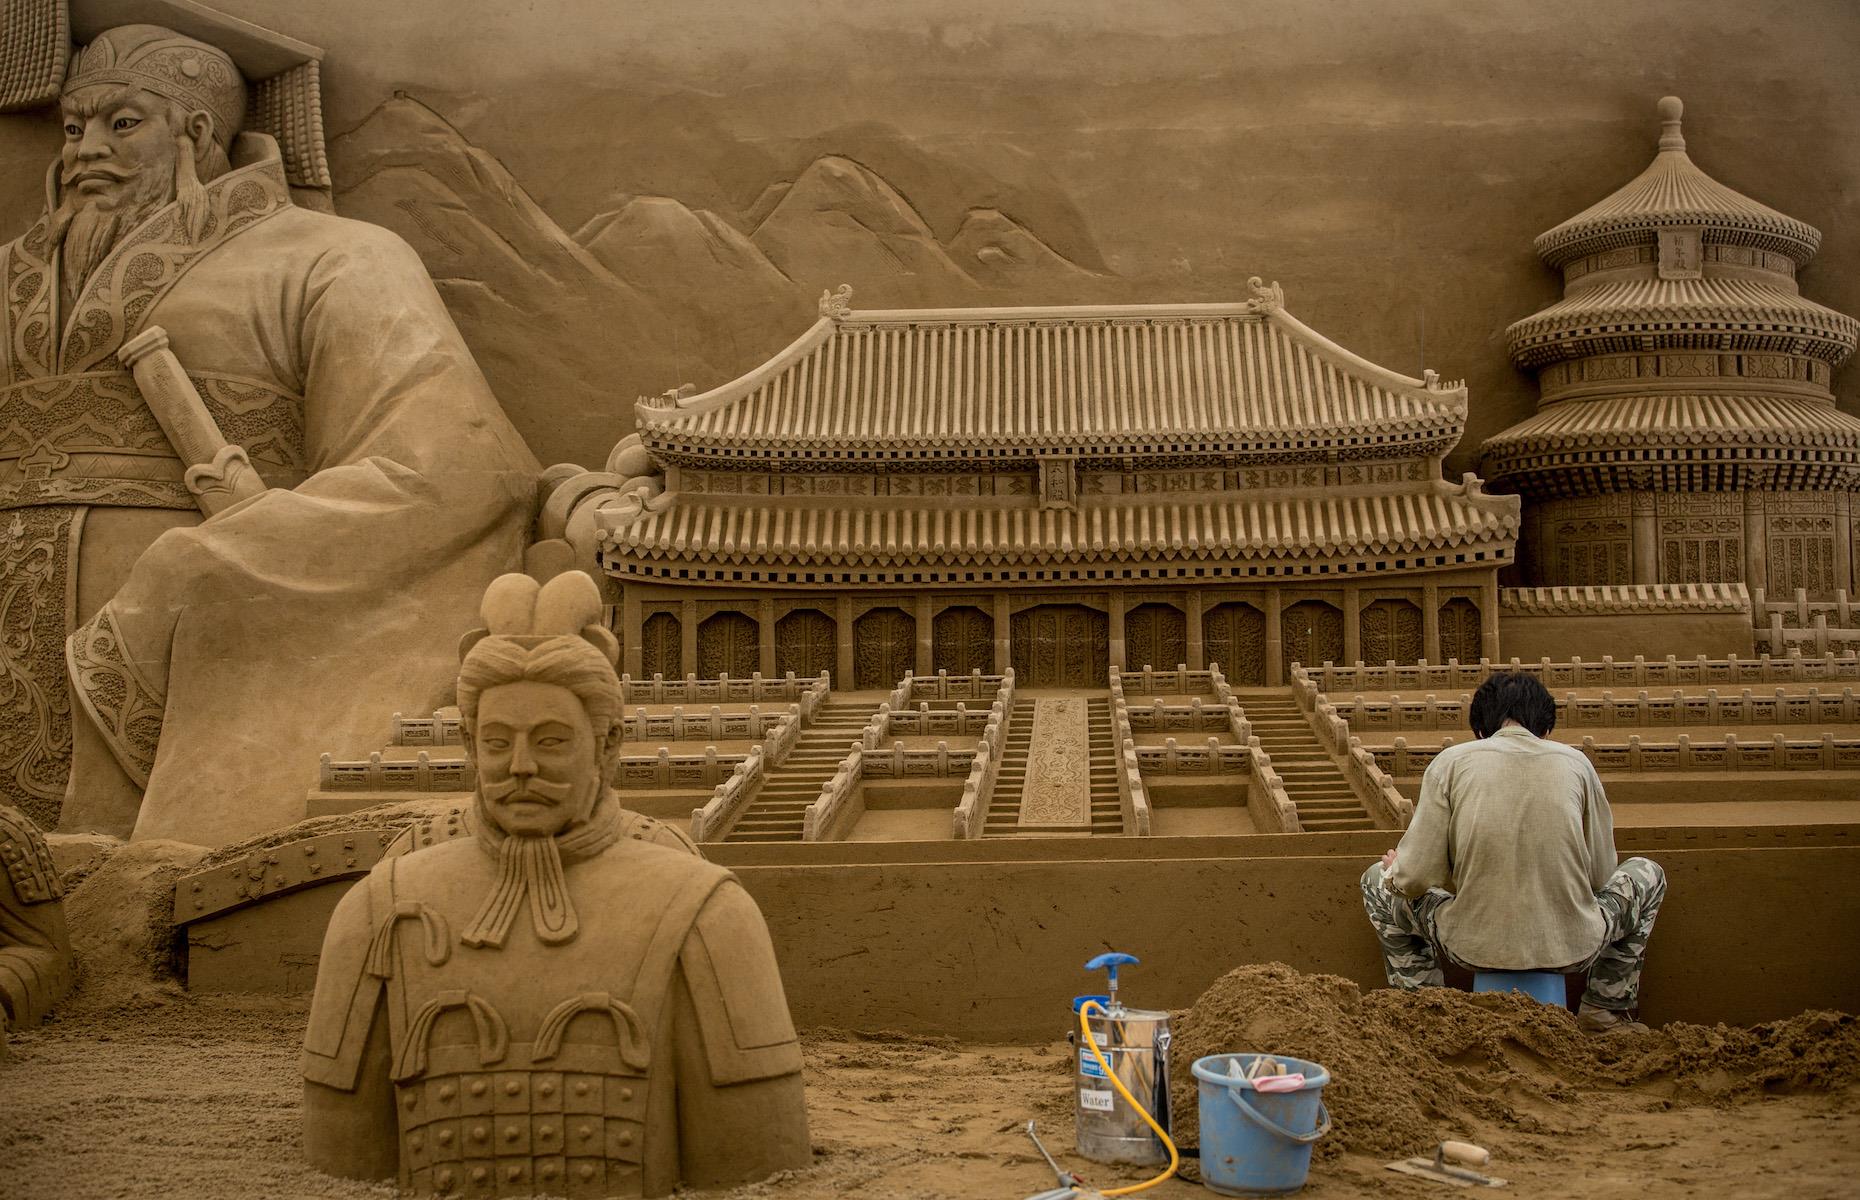 <p>The largest ancient palatial structure in the world was the bold choice for sand sculptor Zhang Weikang (pictured) who created some of the complex sand sculptures on display at the Yokohama Sand Art Exhibition held in 2014. Producer and sand sculptor Katsuhiko Chaen invited artists from around the world to recreate UNESCO World Heritage and other historic buildings in China, Japan and South Korea, including Beijing’s sprawling Forbidden City. </p>  <p><strong><a href="https://www.loveexploring.com/galleries/78647/50-wonders-of-the-world-and-how-to-explore-them?page=1">See the 50 wonders of the world everyone should visit once</a></strong></p>